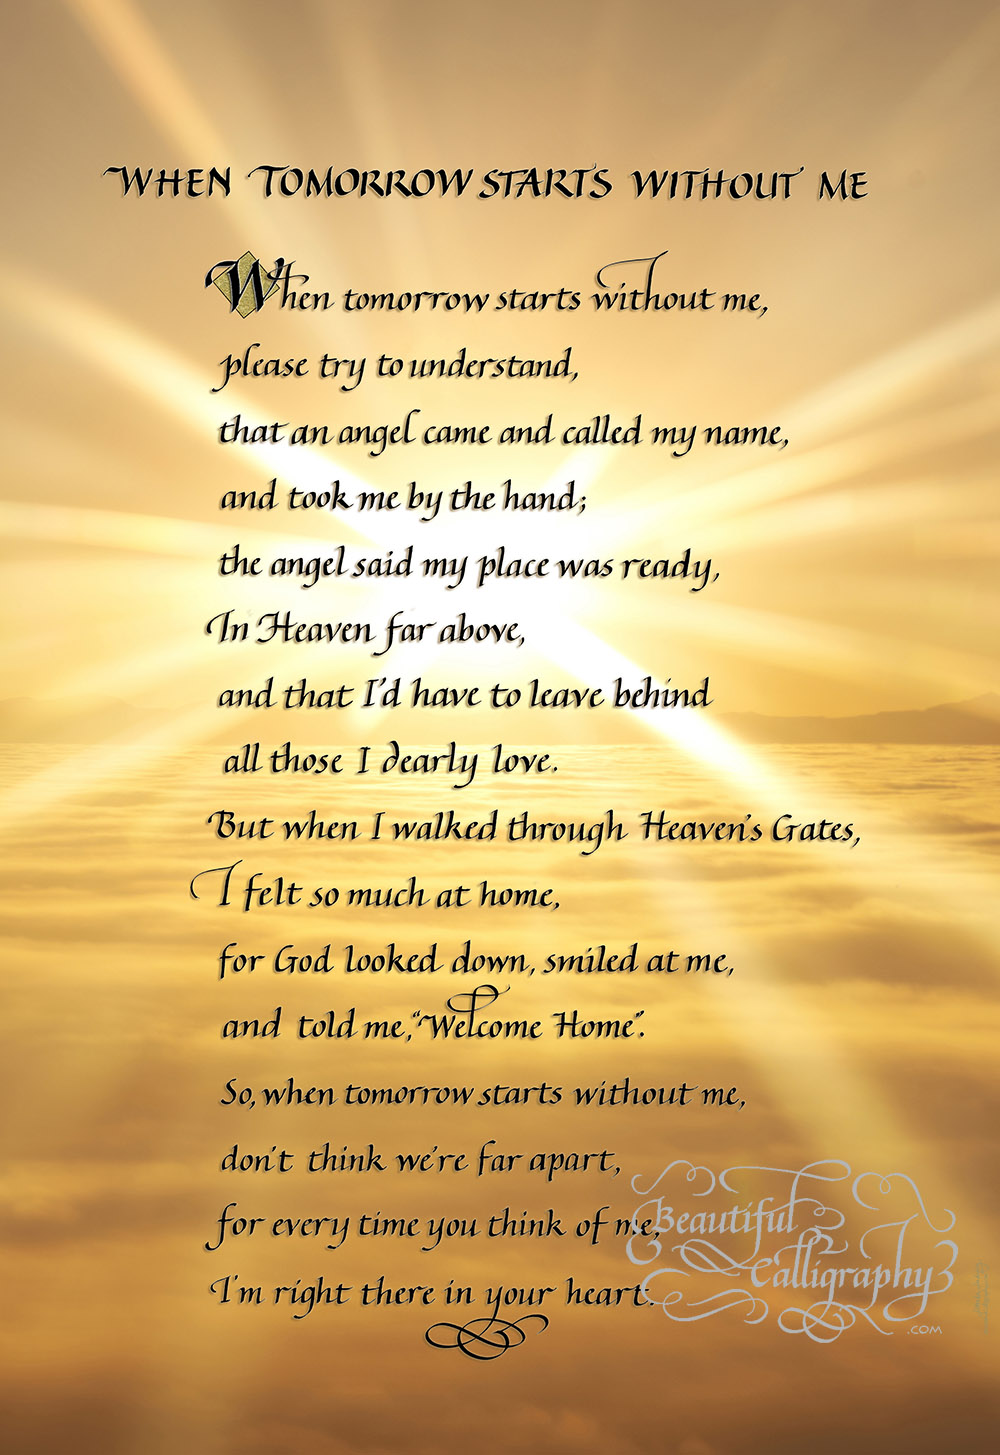 Memorial Poem- When Tomorrow Comes Without Me written in calligraphy on golden sky background